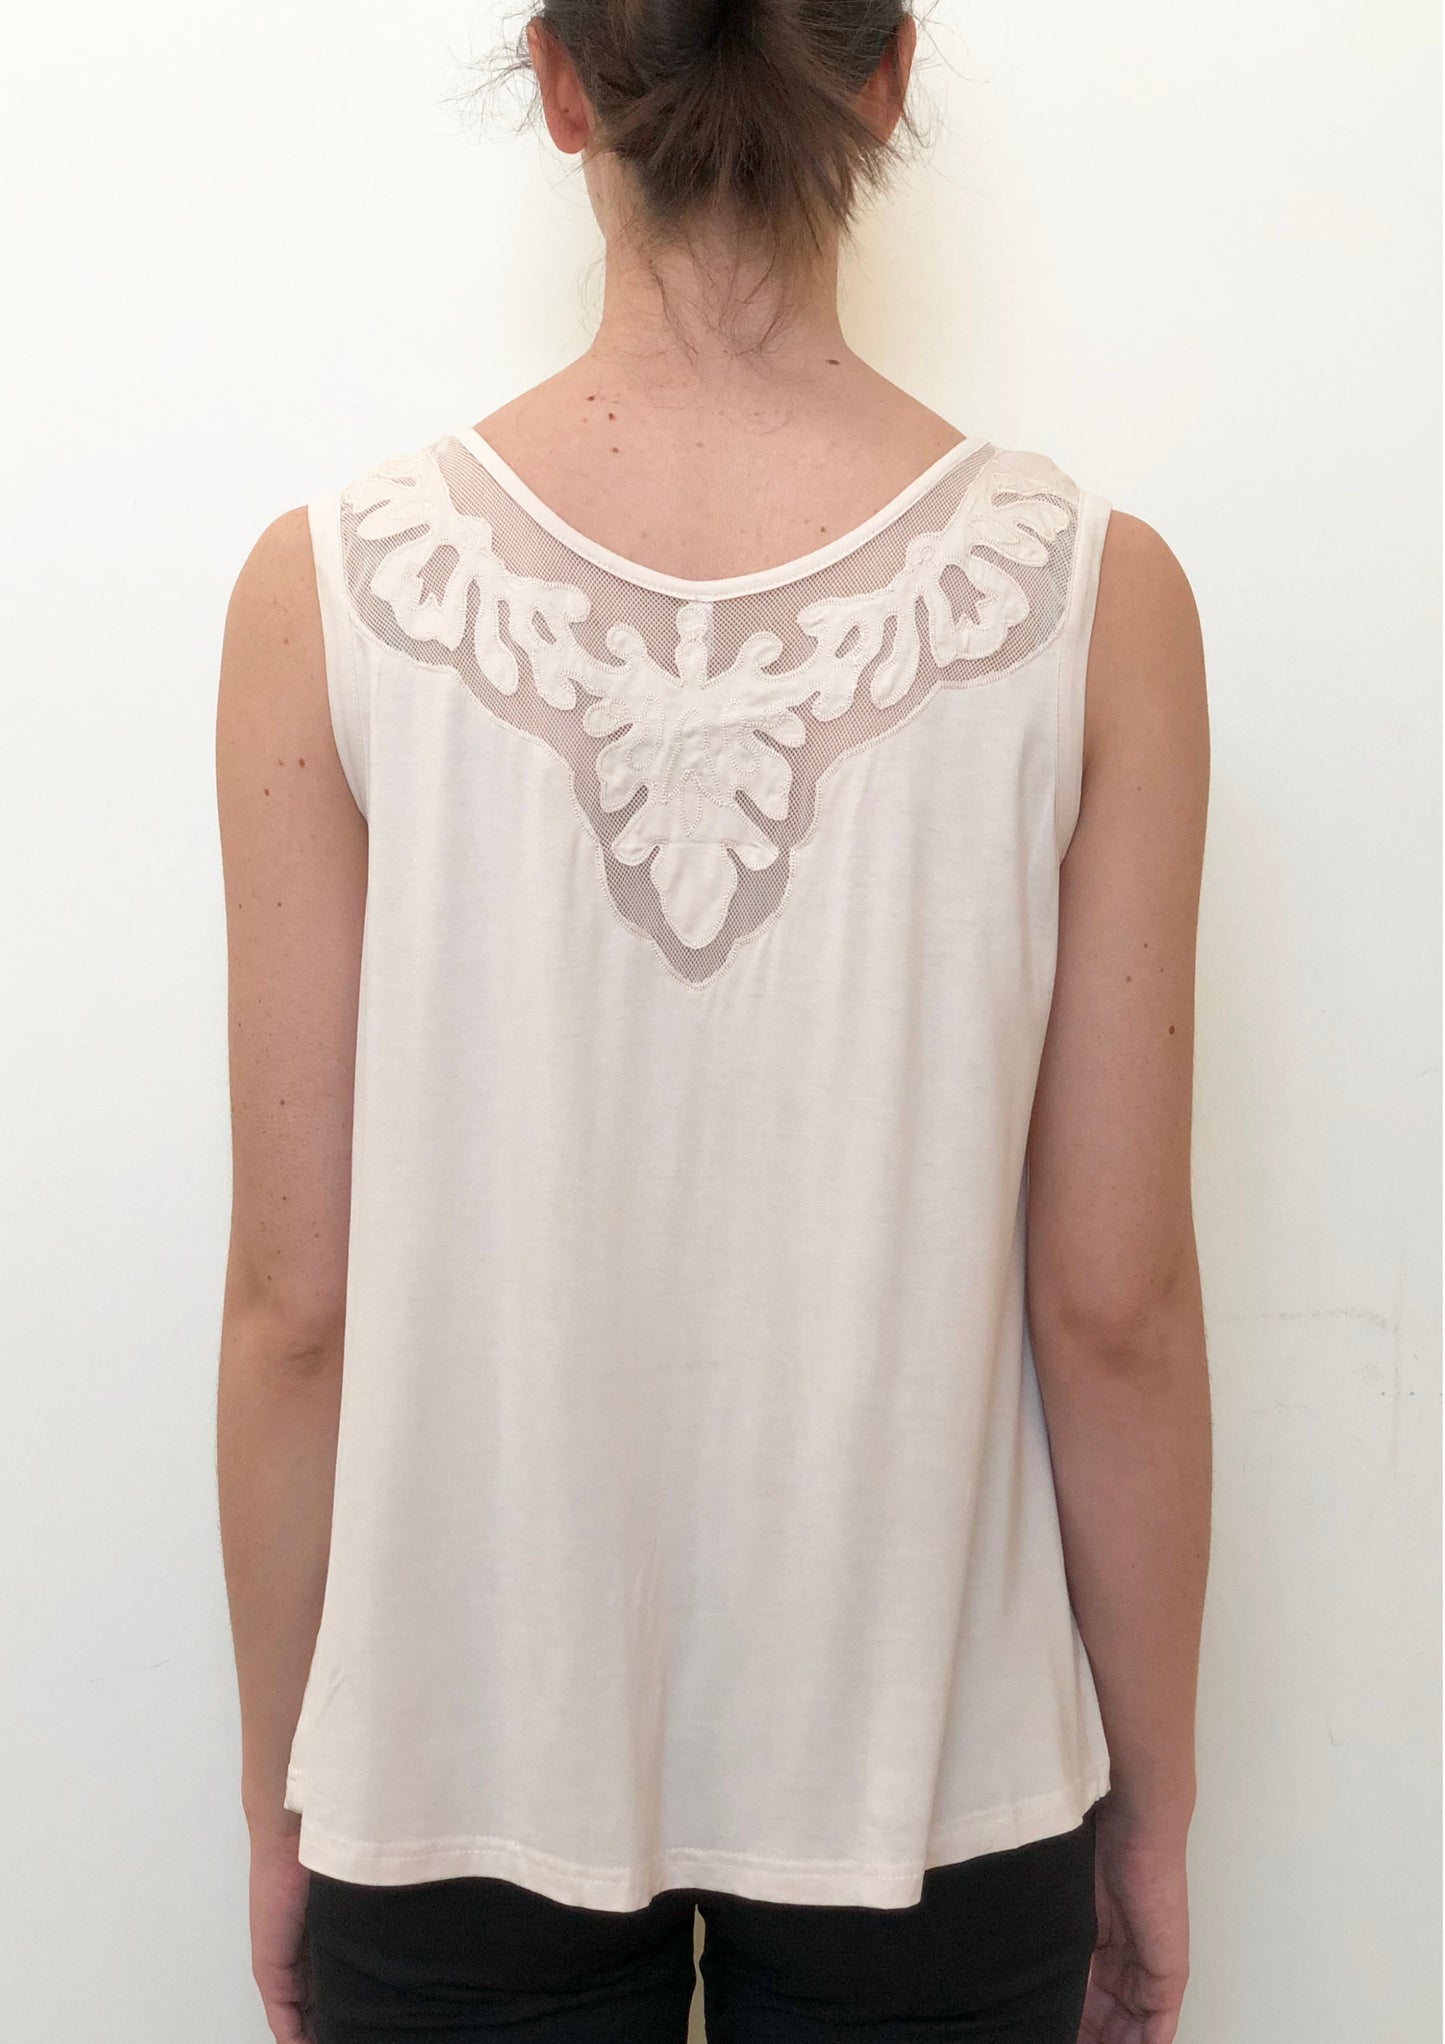 V58SS Embroidered Detailed Top (Pack) on sale $5